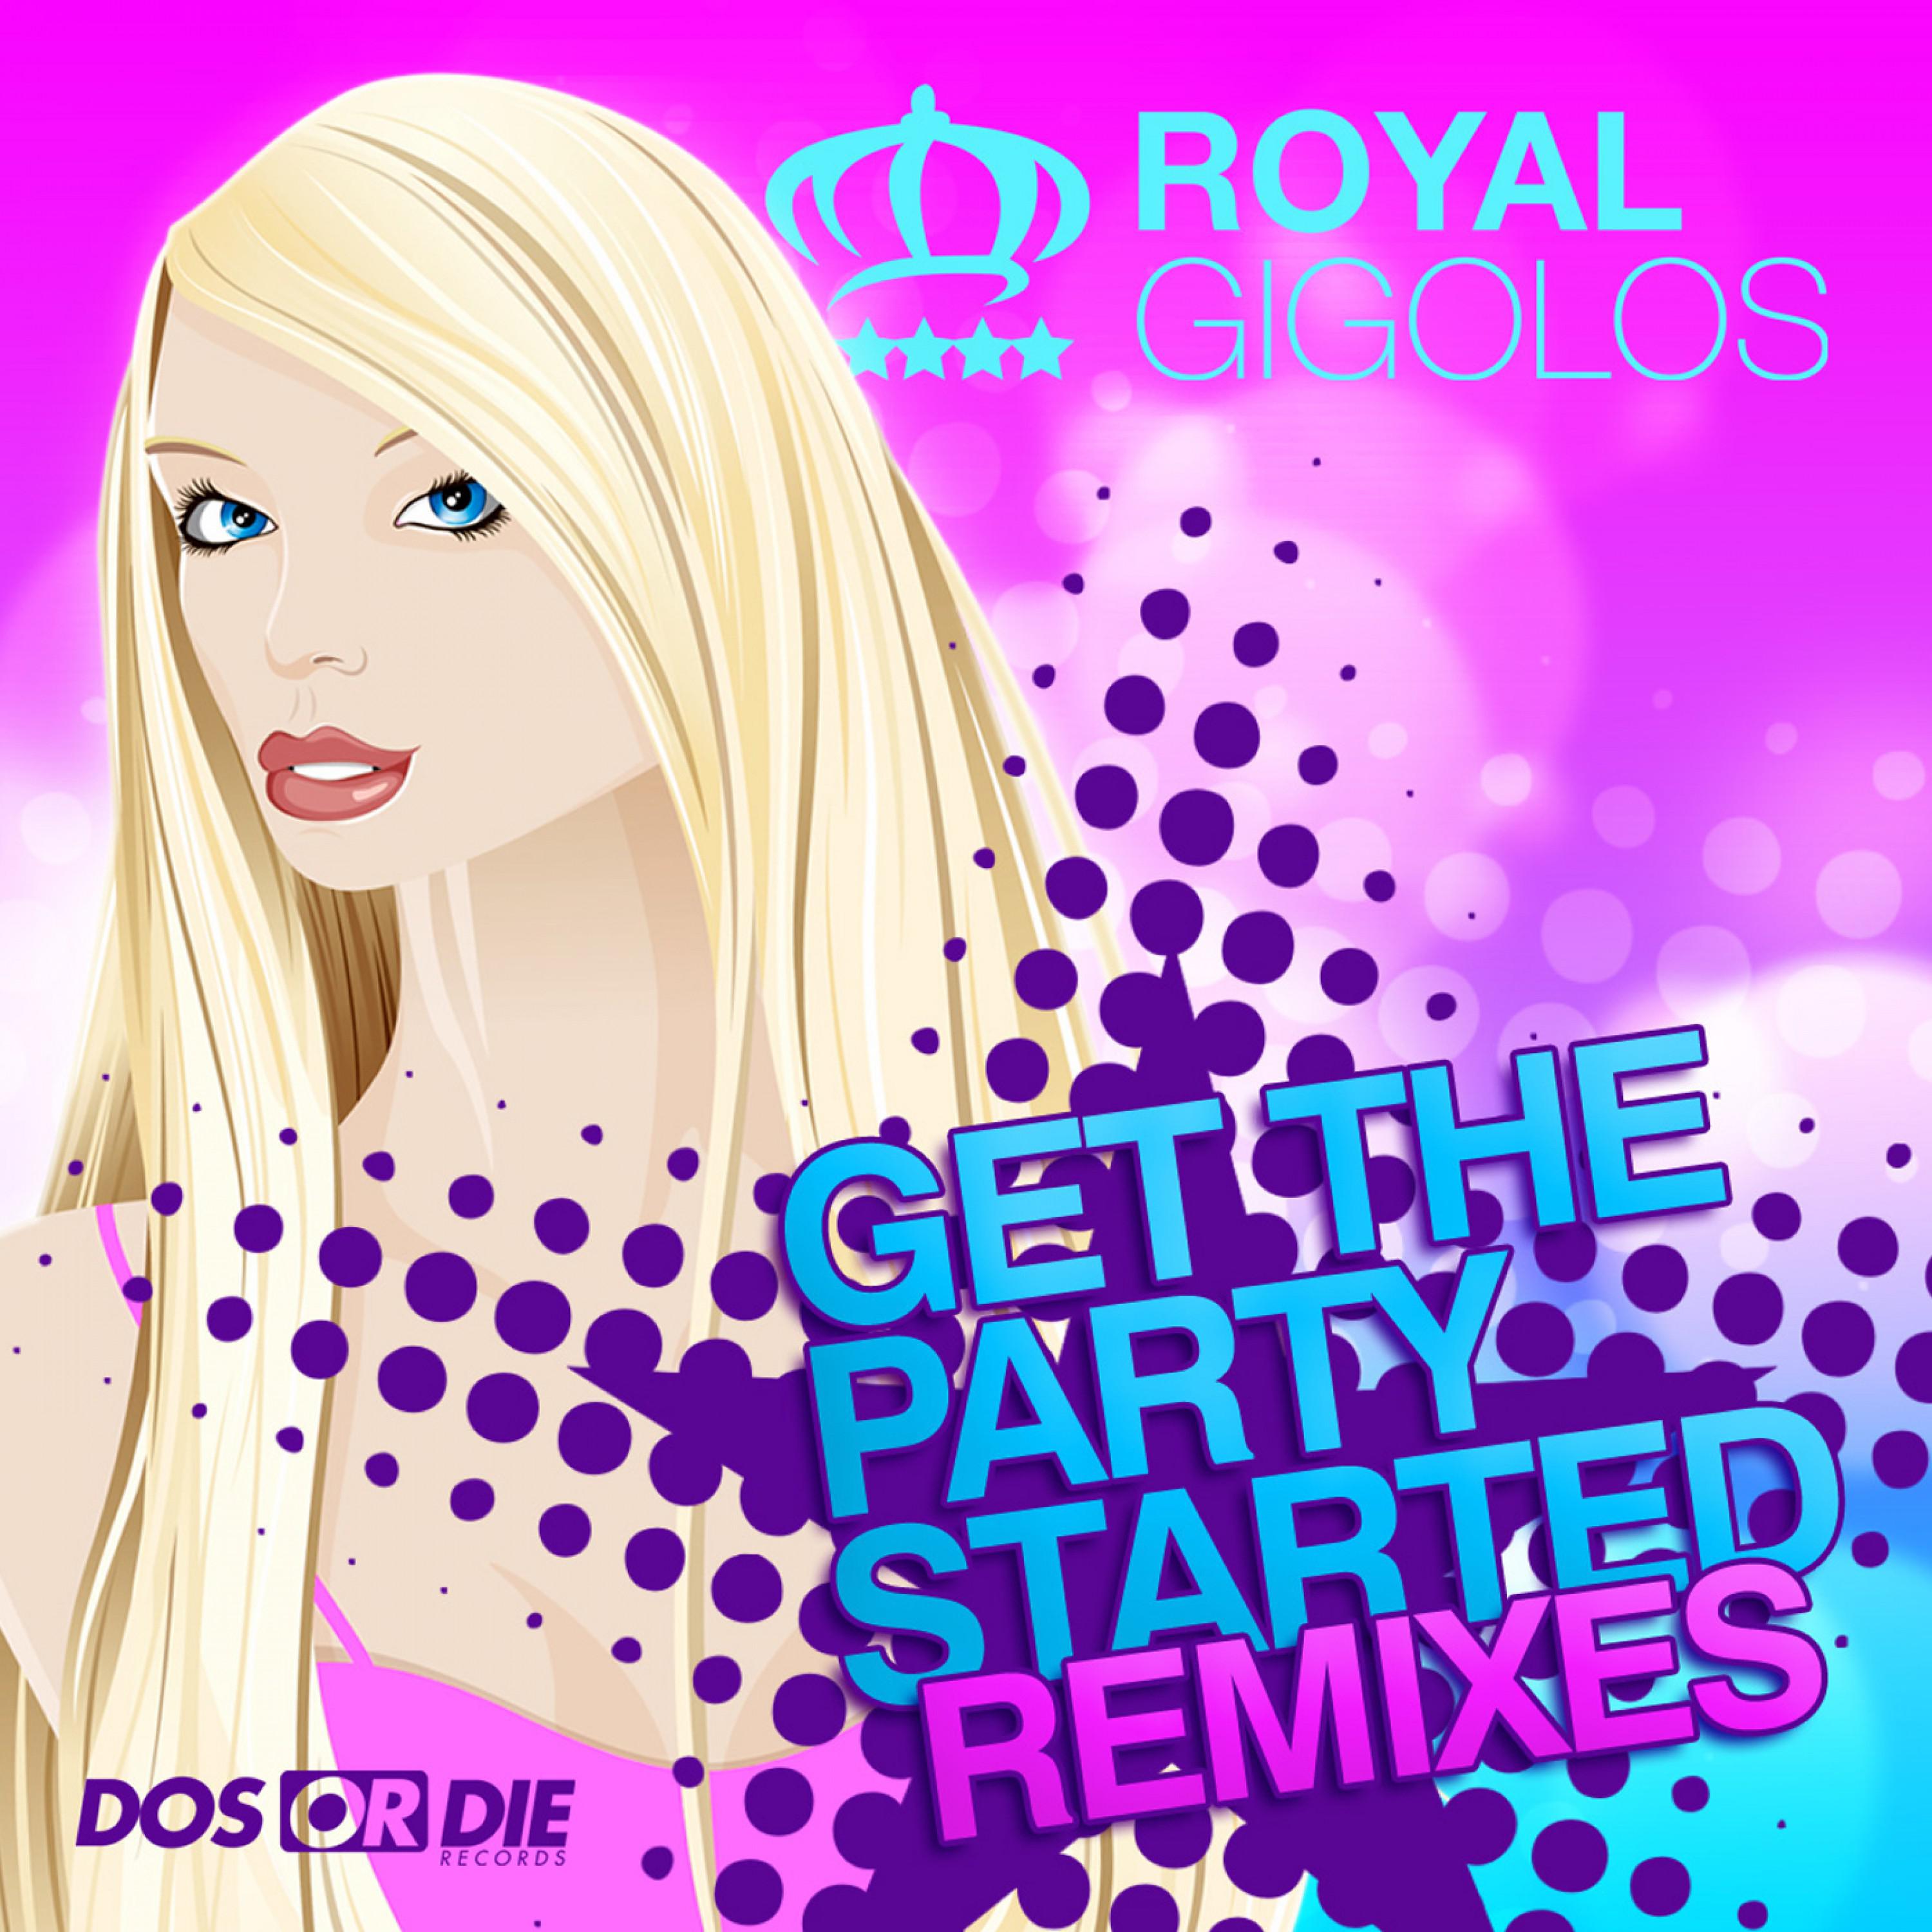 Get the Party Started (Remixes)